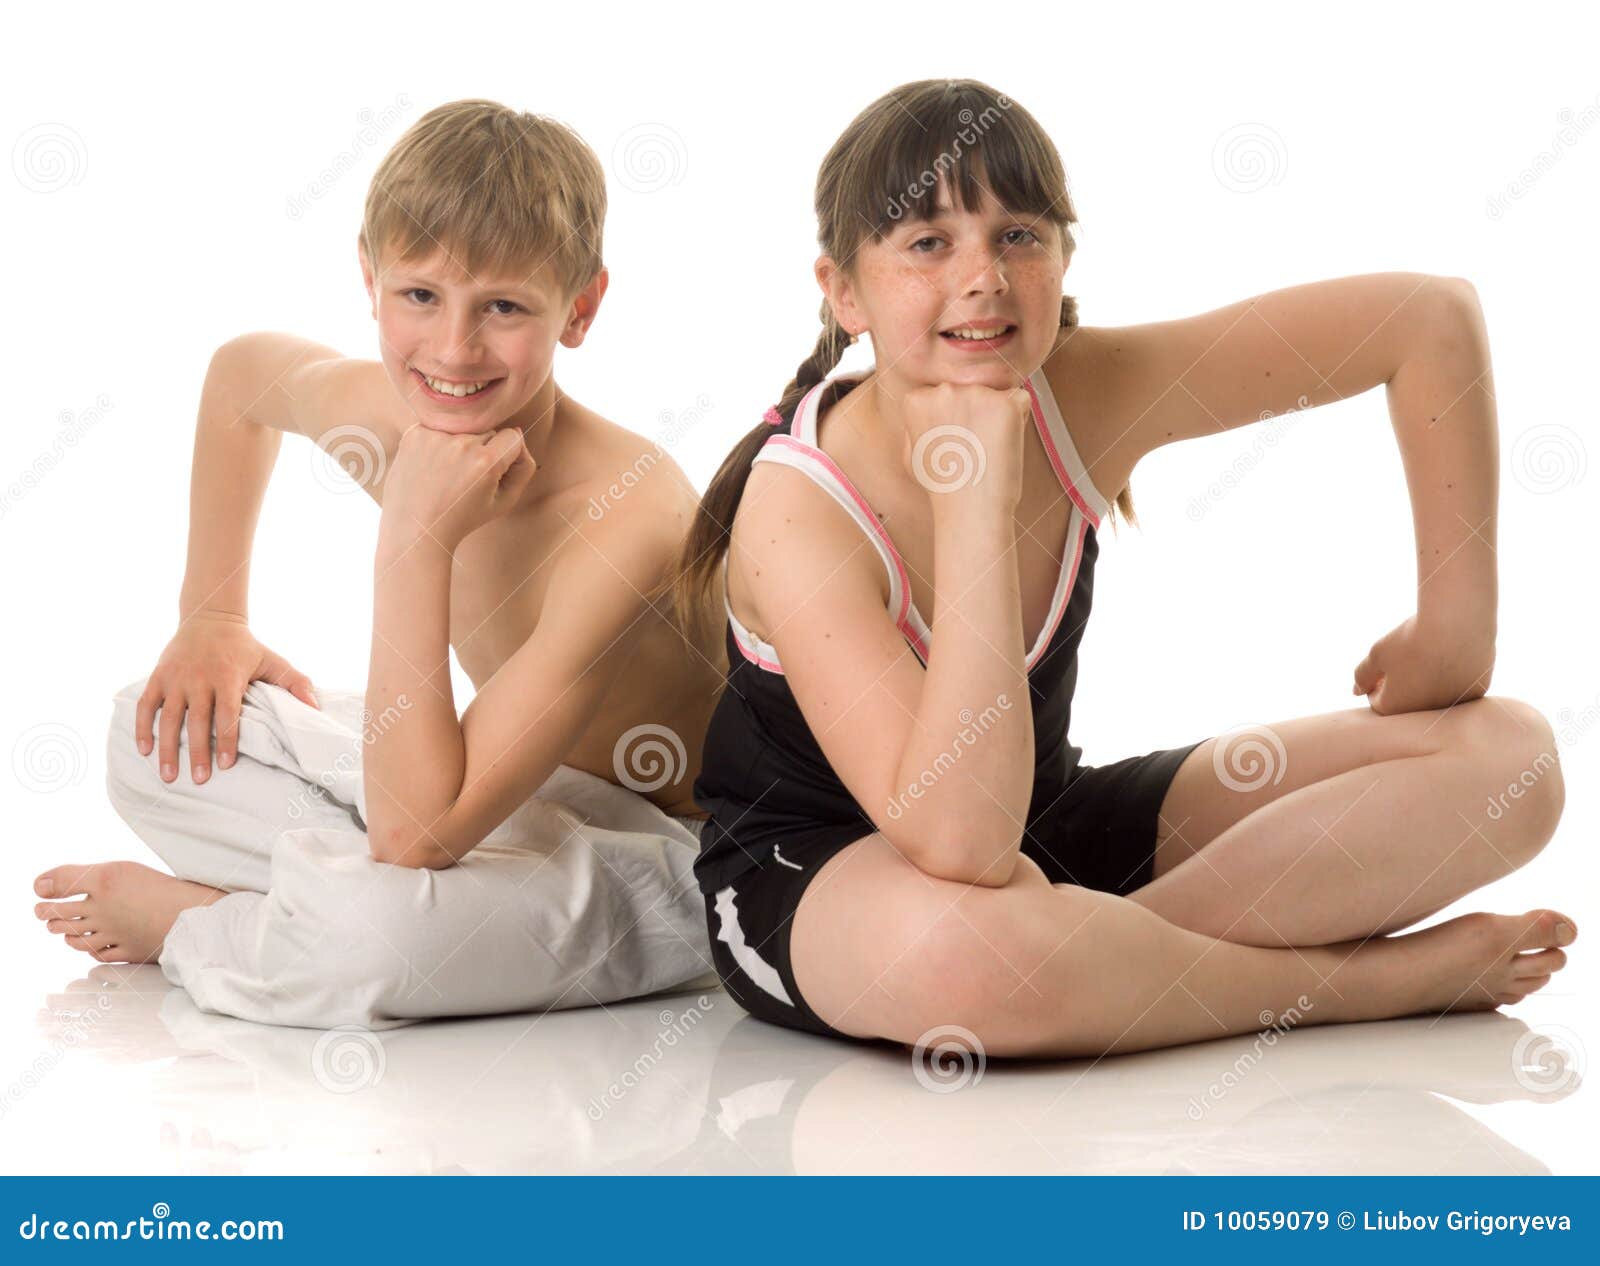 Supple Massage Embryo The boy and girl at sport stock image. Image of child - 10059079